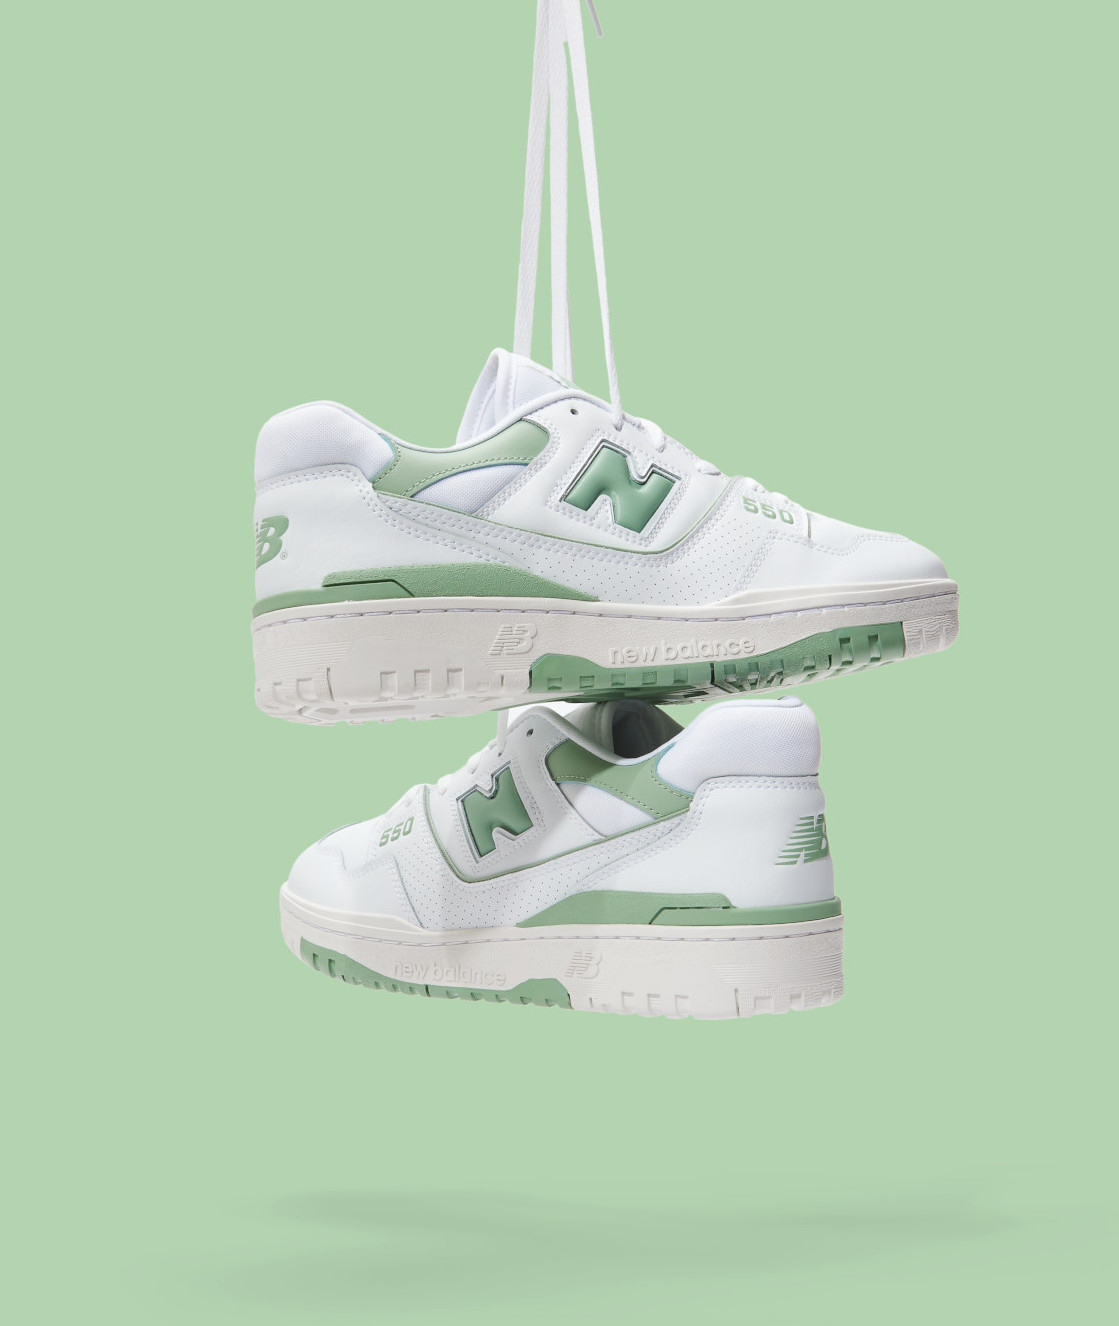 Foot Locker on Twitter: "Hit after hit 🥵 Part of the Balance pack, this white/green 550 dropping in men's &amp; kids sizing on 7/20! Reservations are now open in